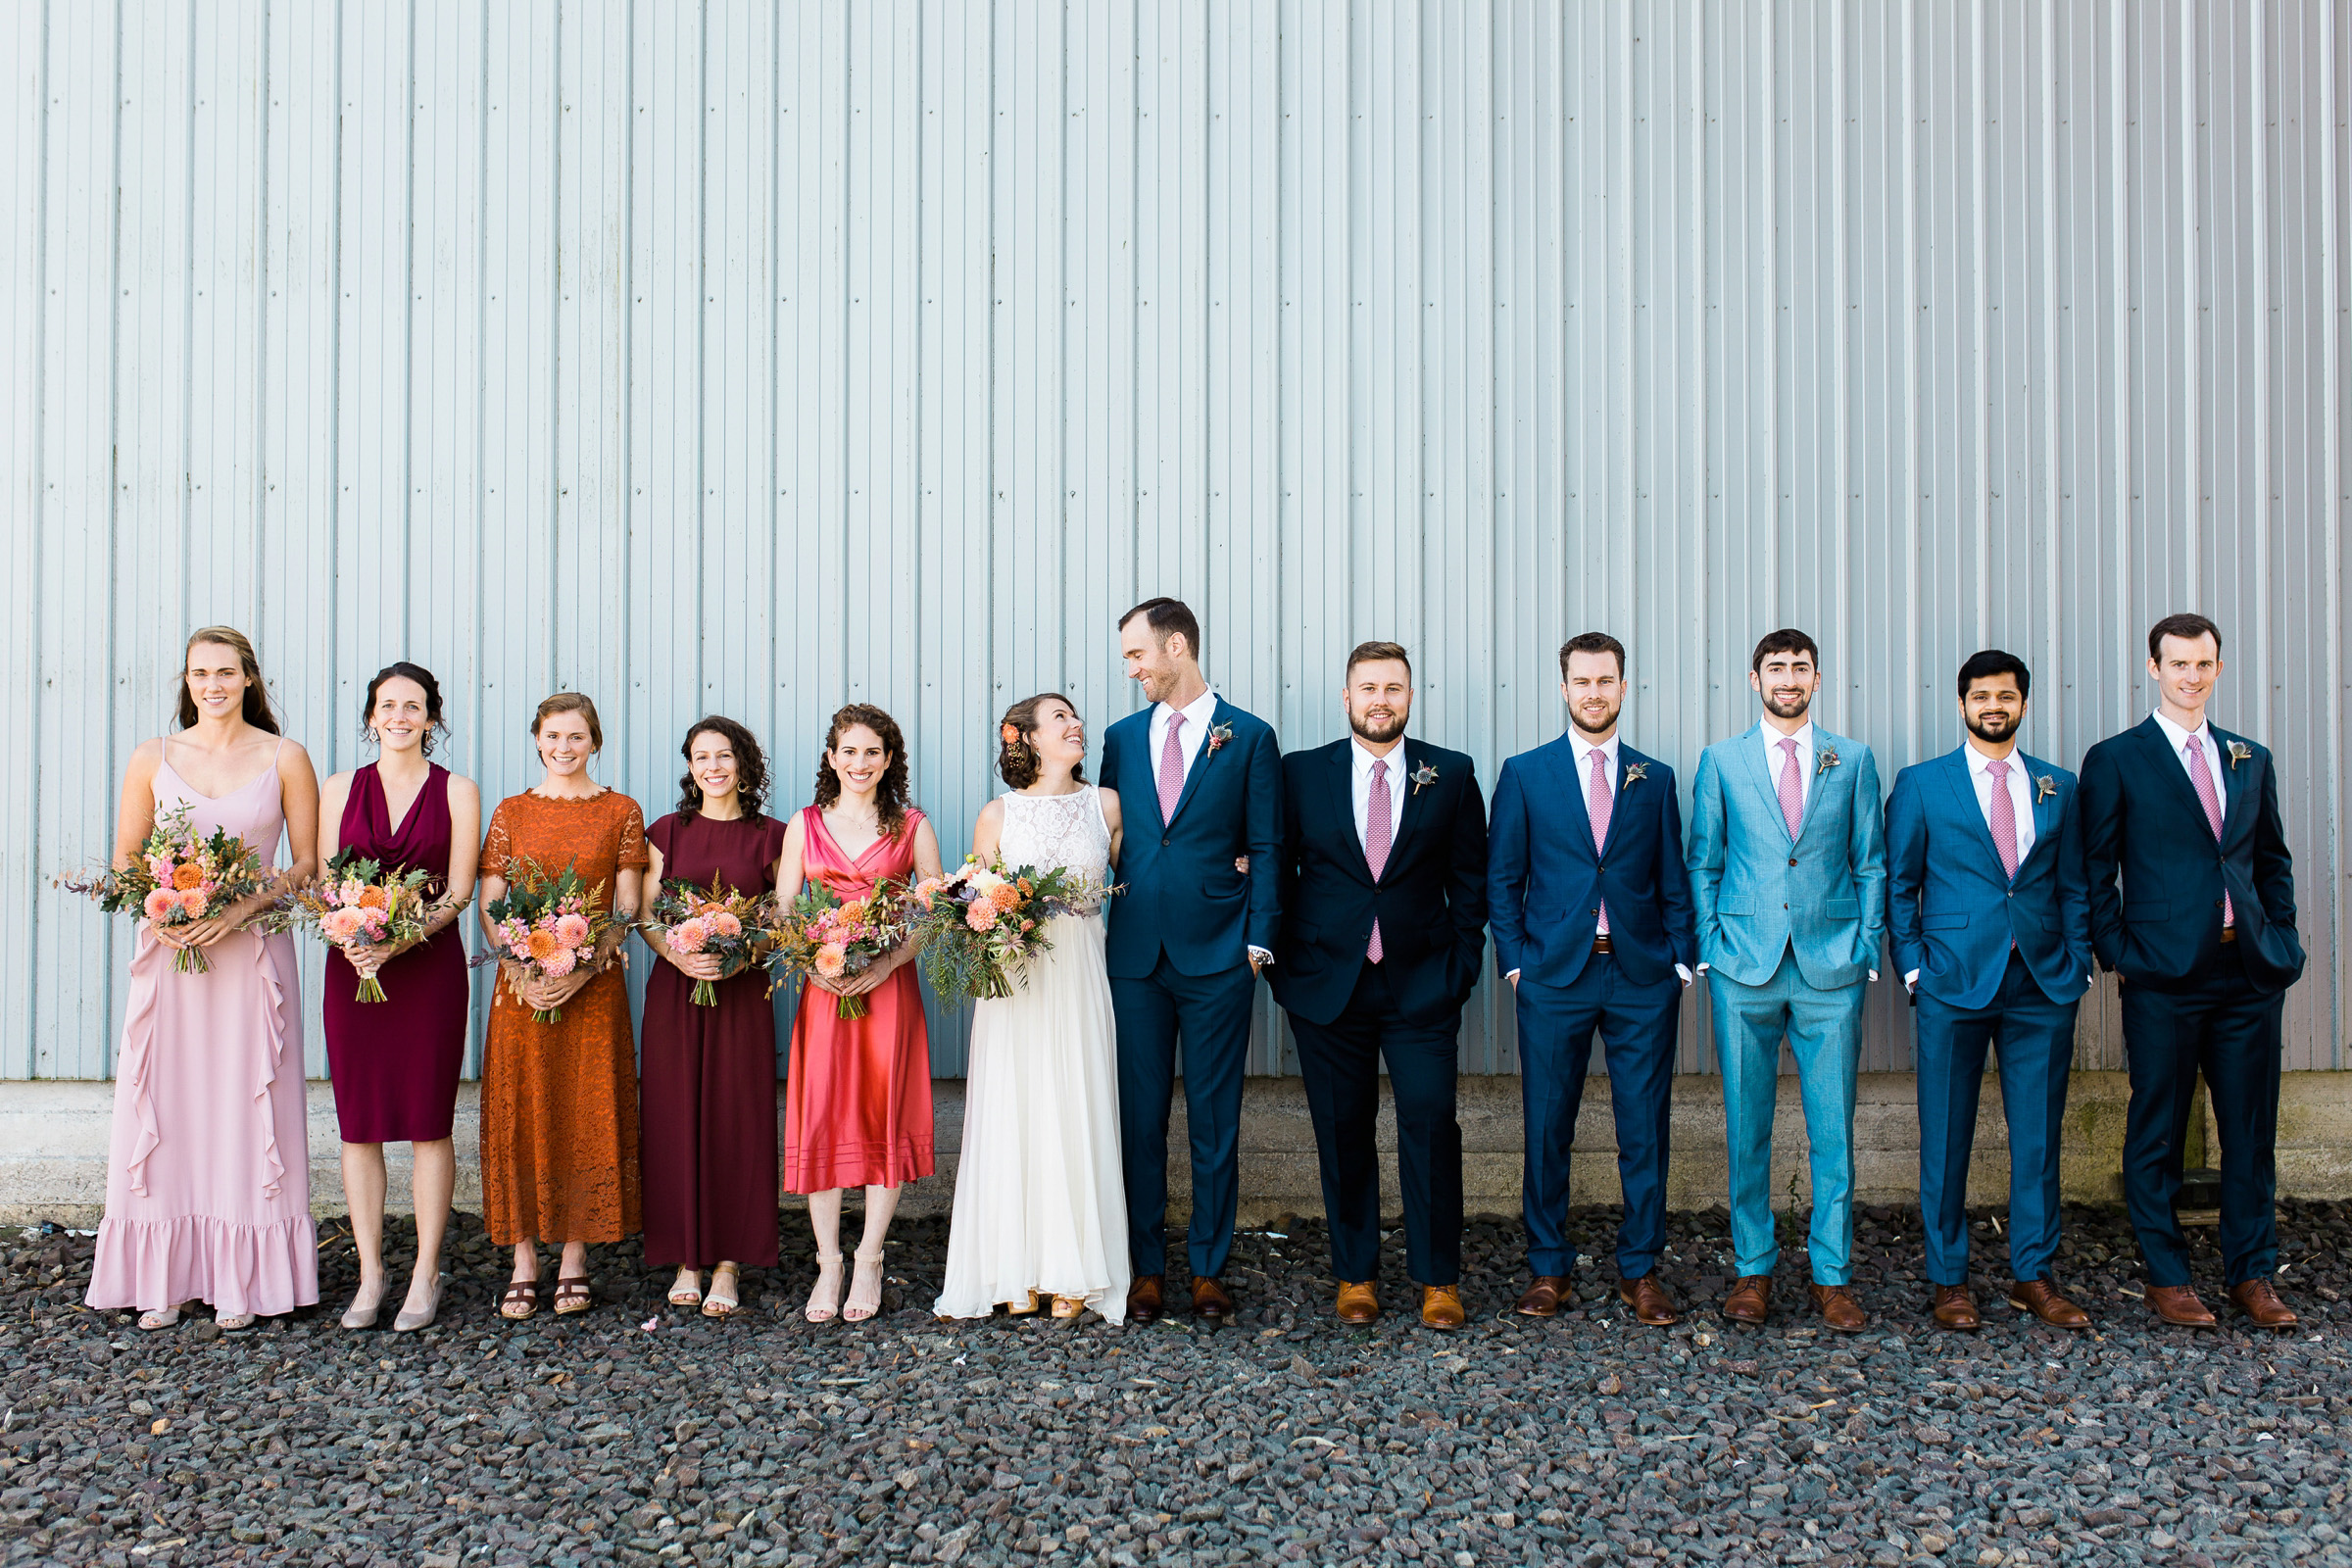 15-the-Fields-at-Willie-Greens-Wedding-Venue-Seattle-Photographer-bride-groom-bridesmaids-groomsmen-portraits-Photography